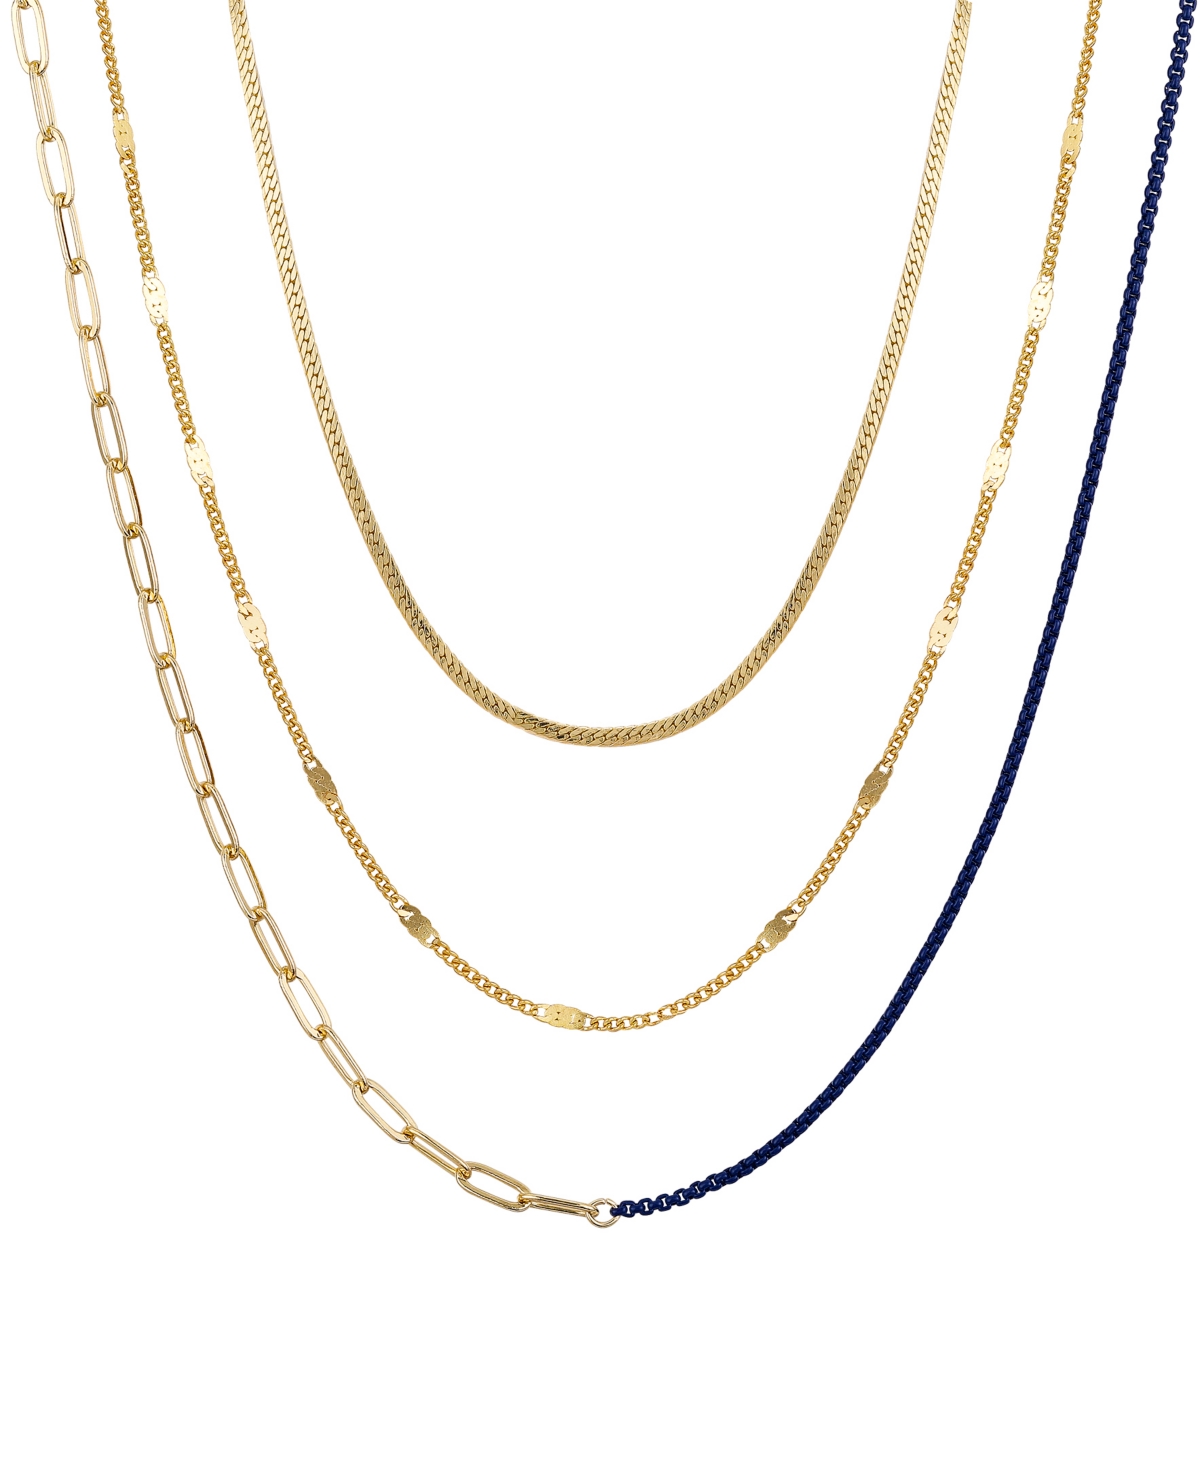 14k Gold Flash Plated White Enamel Paperclip Herringbone Chain Layered Necklaces, 3 Piece Set - Gold